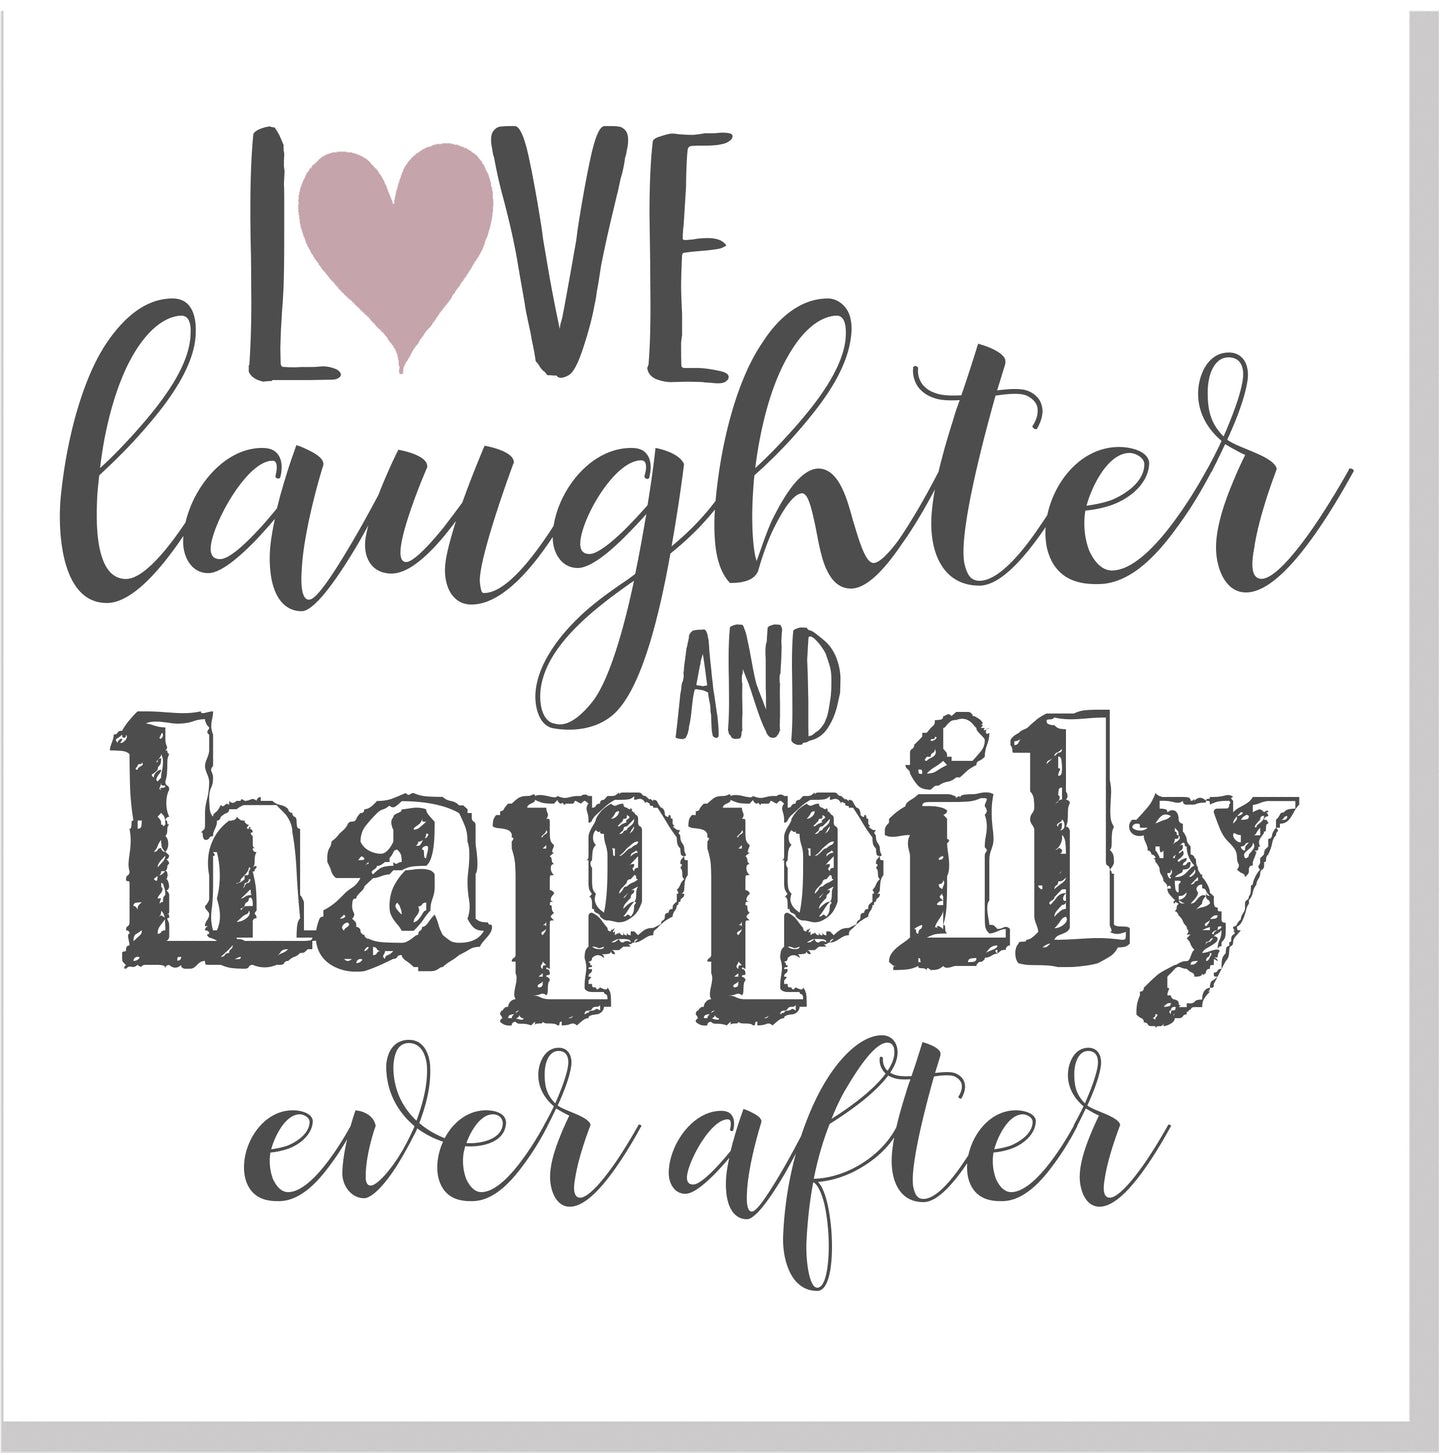 Love Laughter and Happily ever after square card